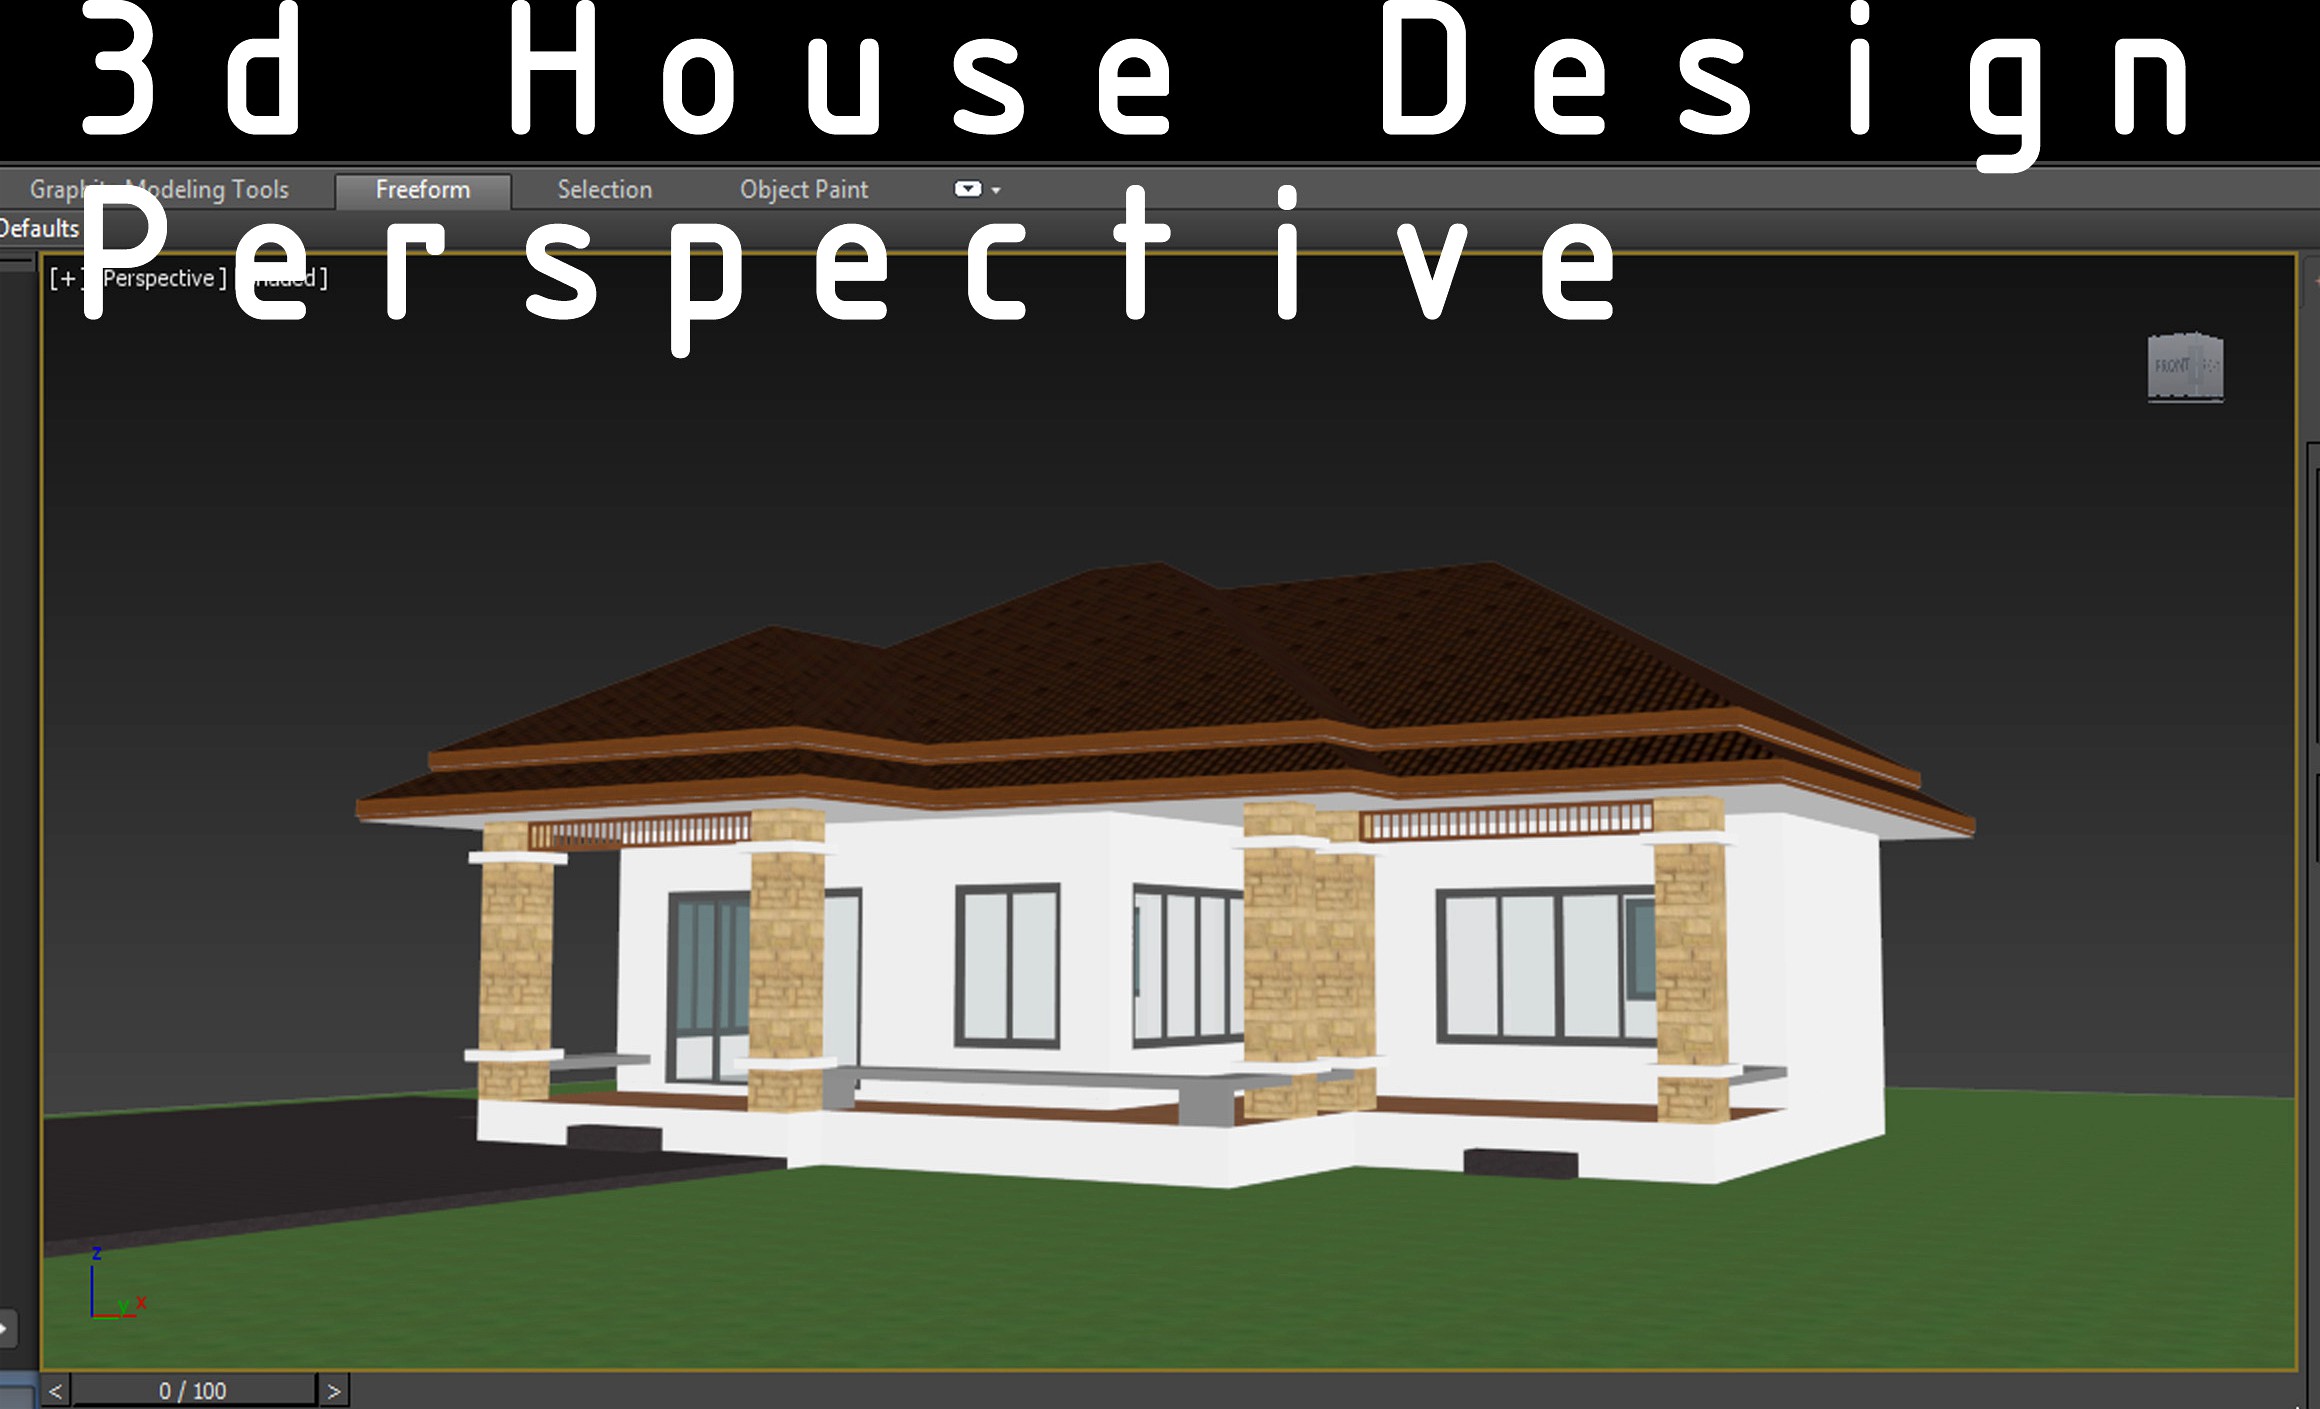 3DHouse